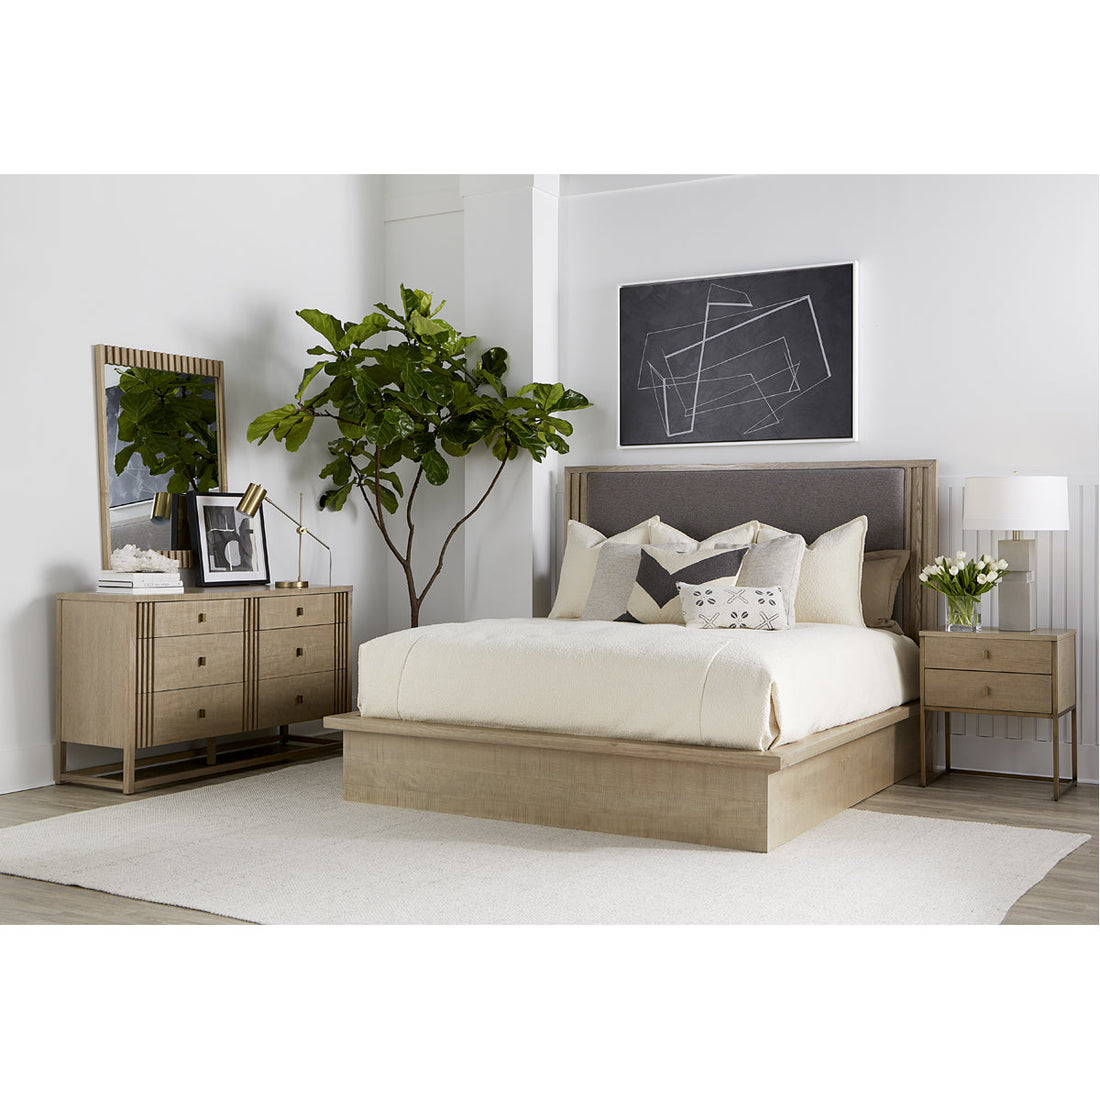 A.R.T. Furniture Panel Bed